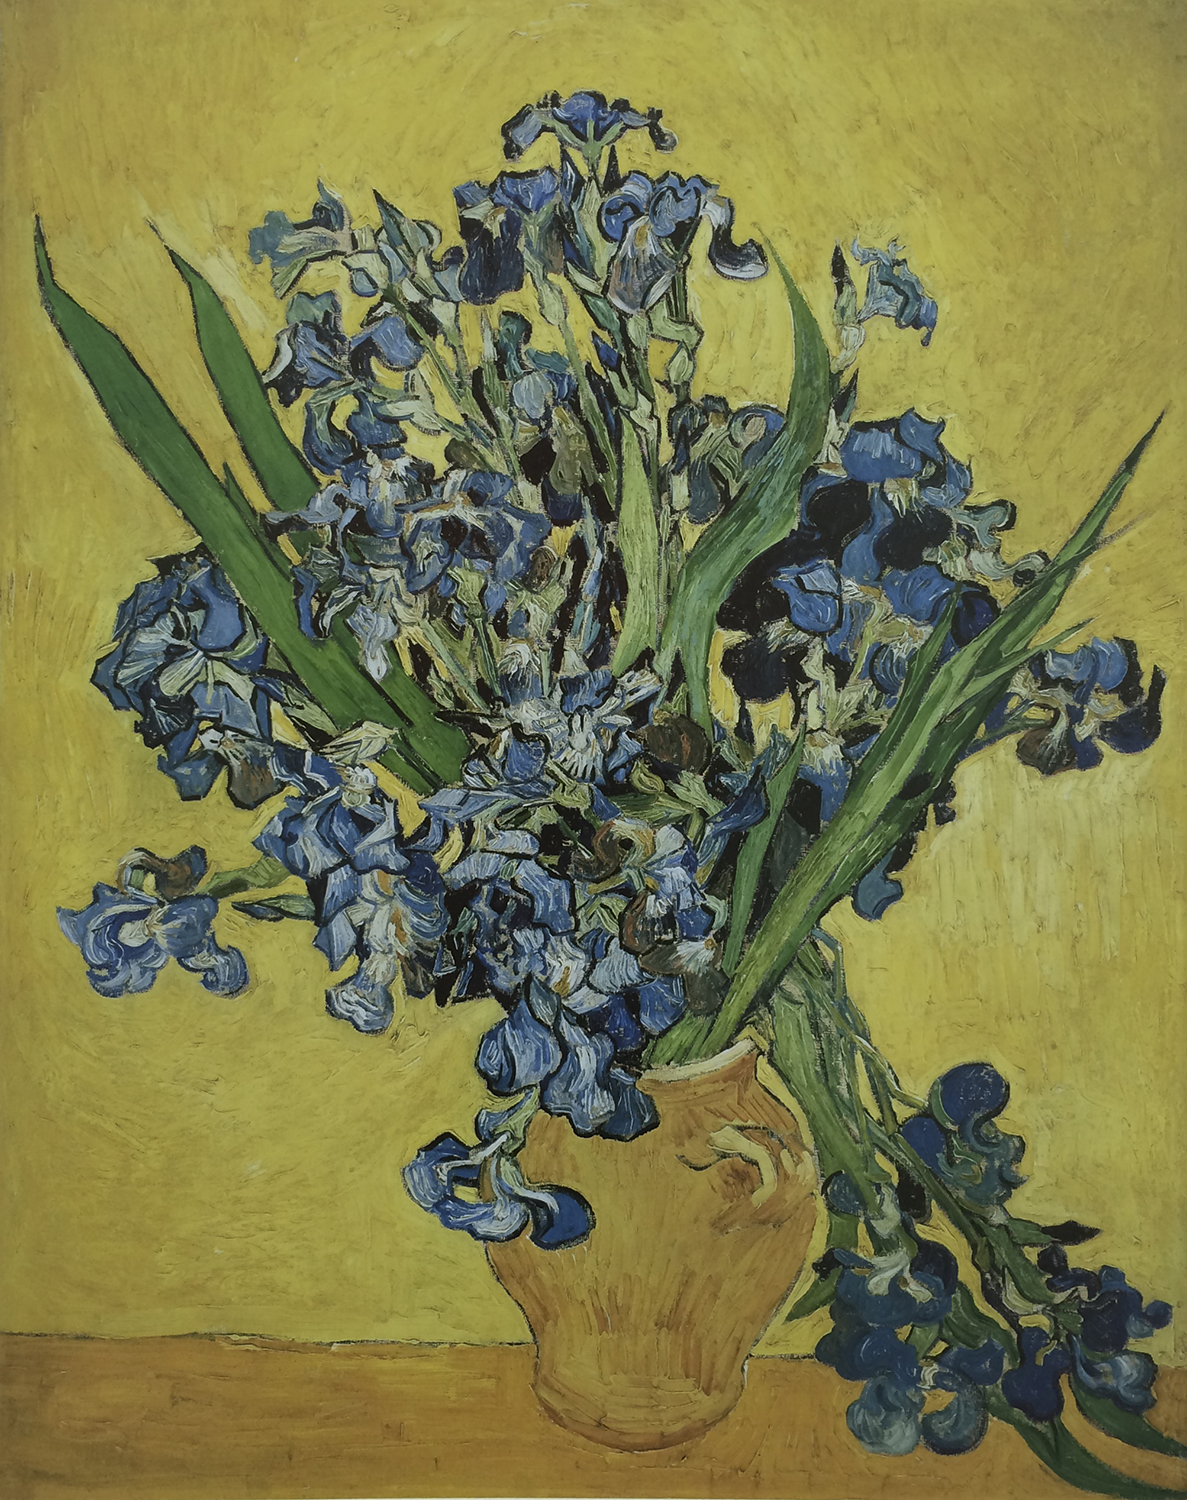 Vase with Irises Against a Yellow Background, 1890